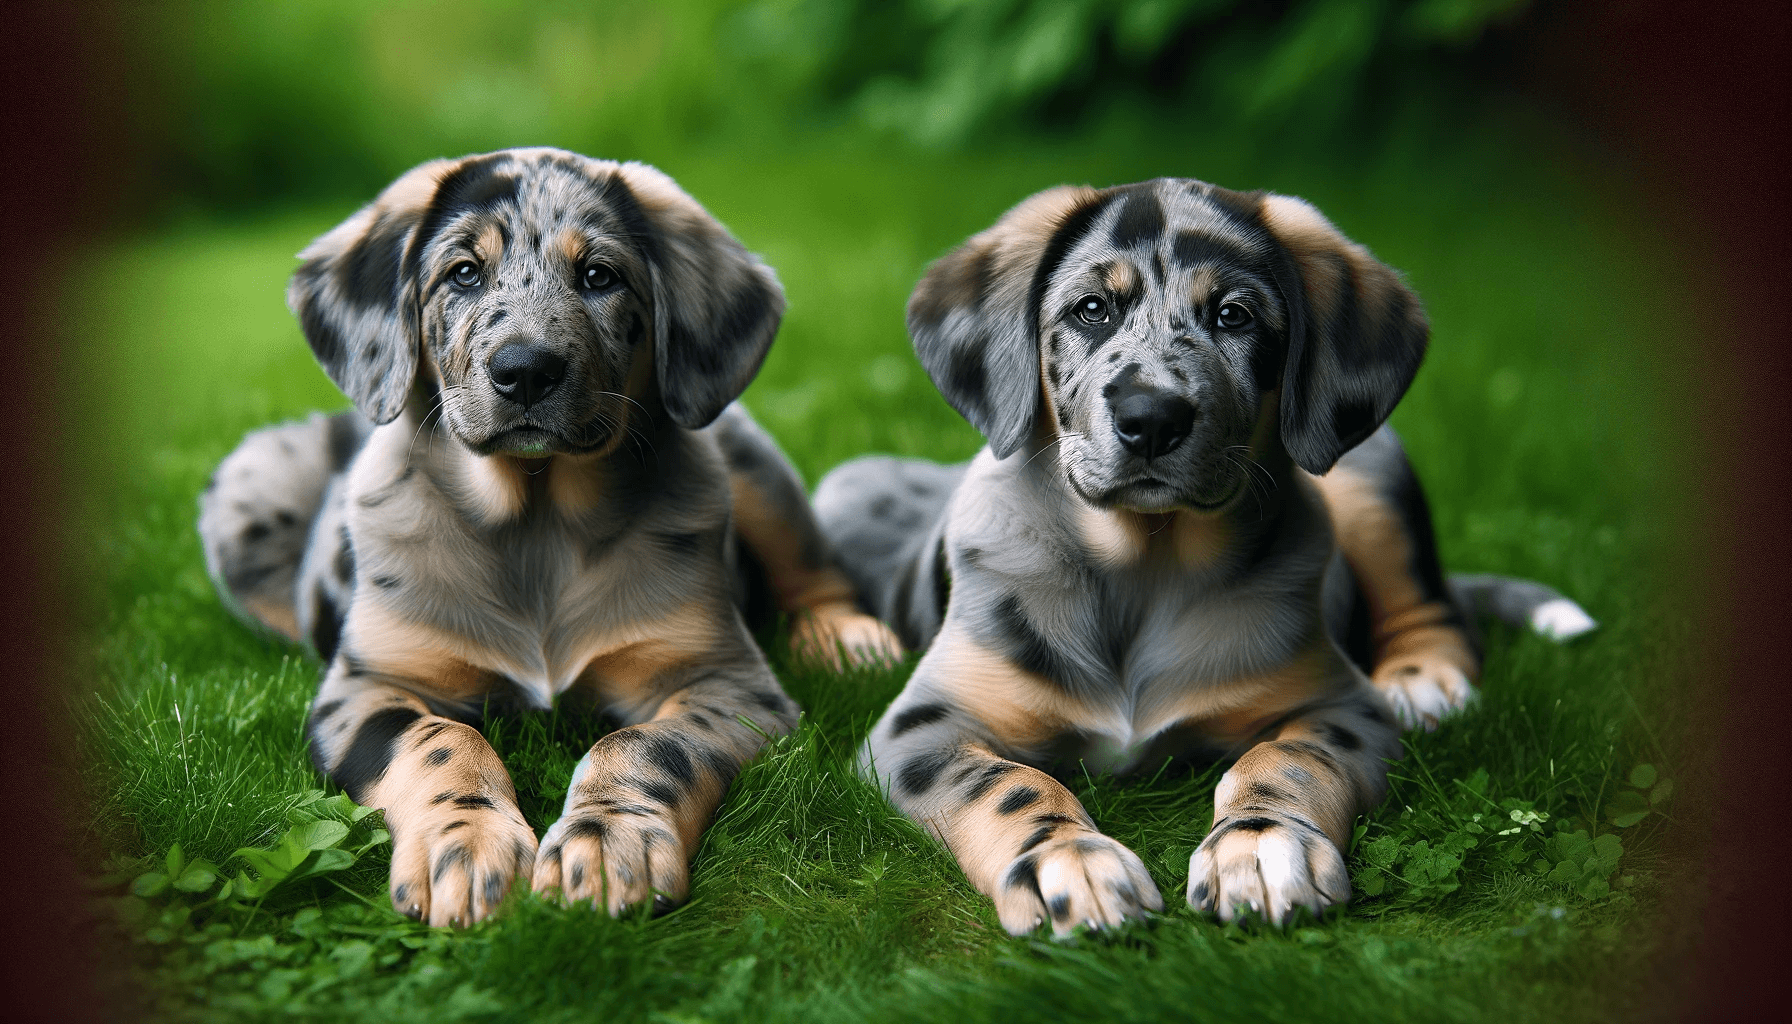 Two Labahoula Puppies Lying on Grass